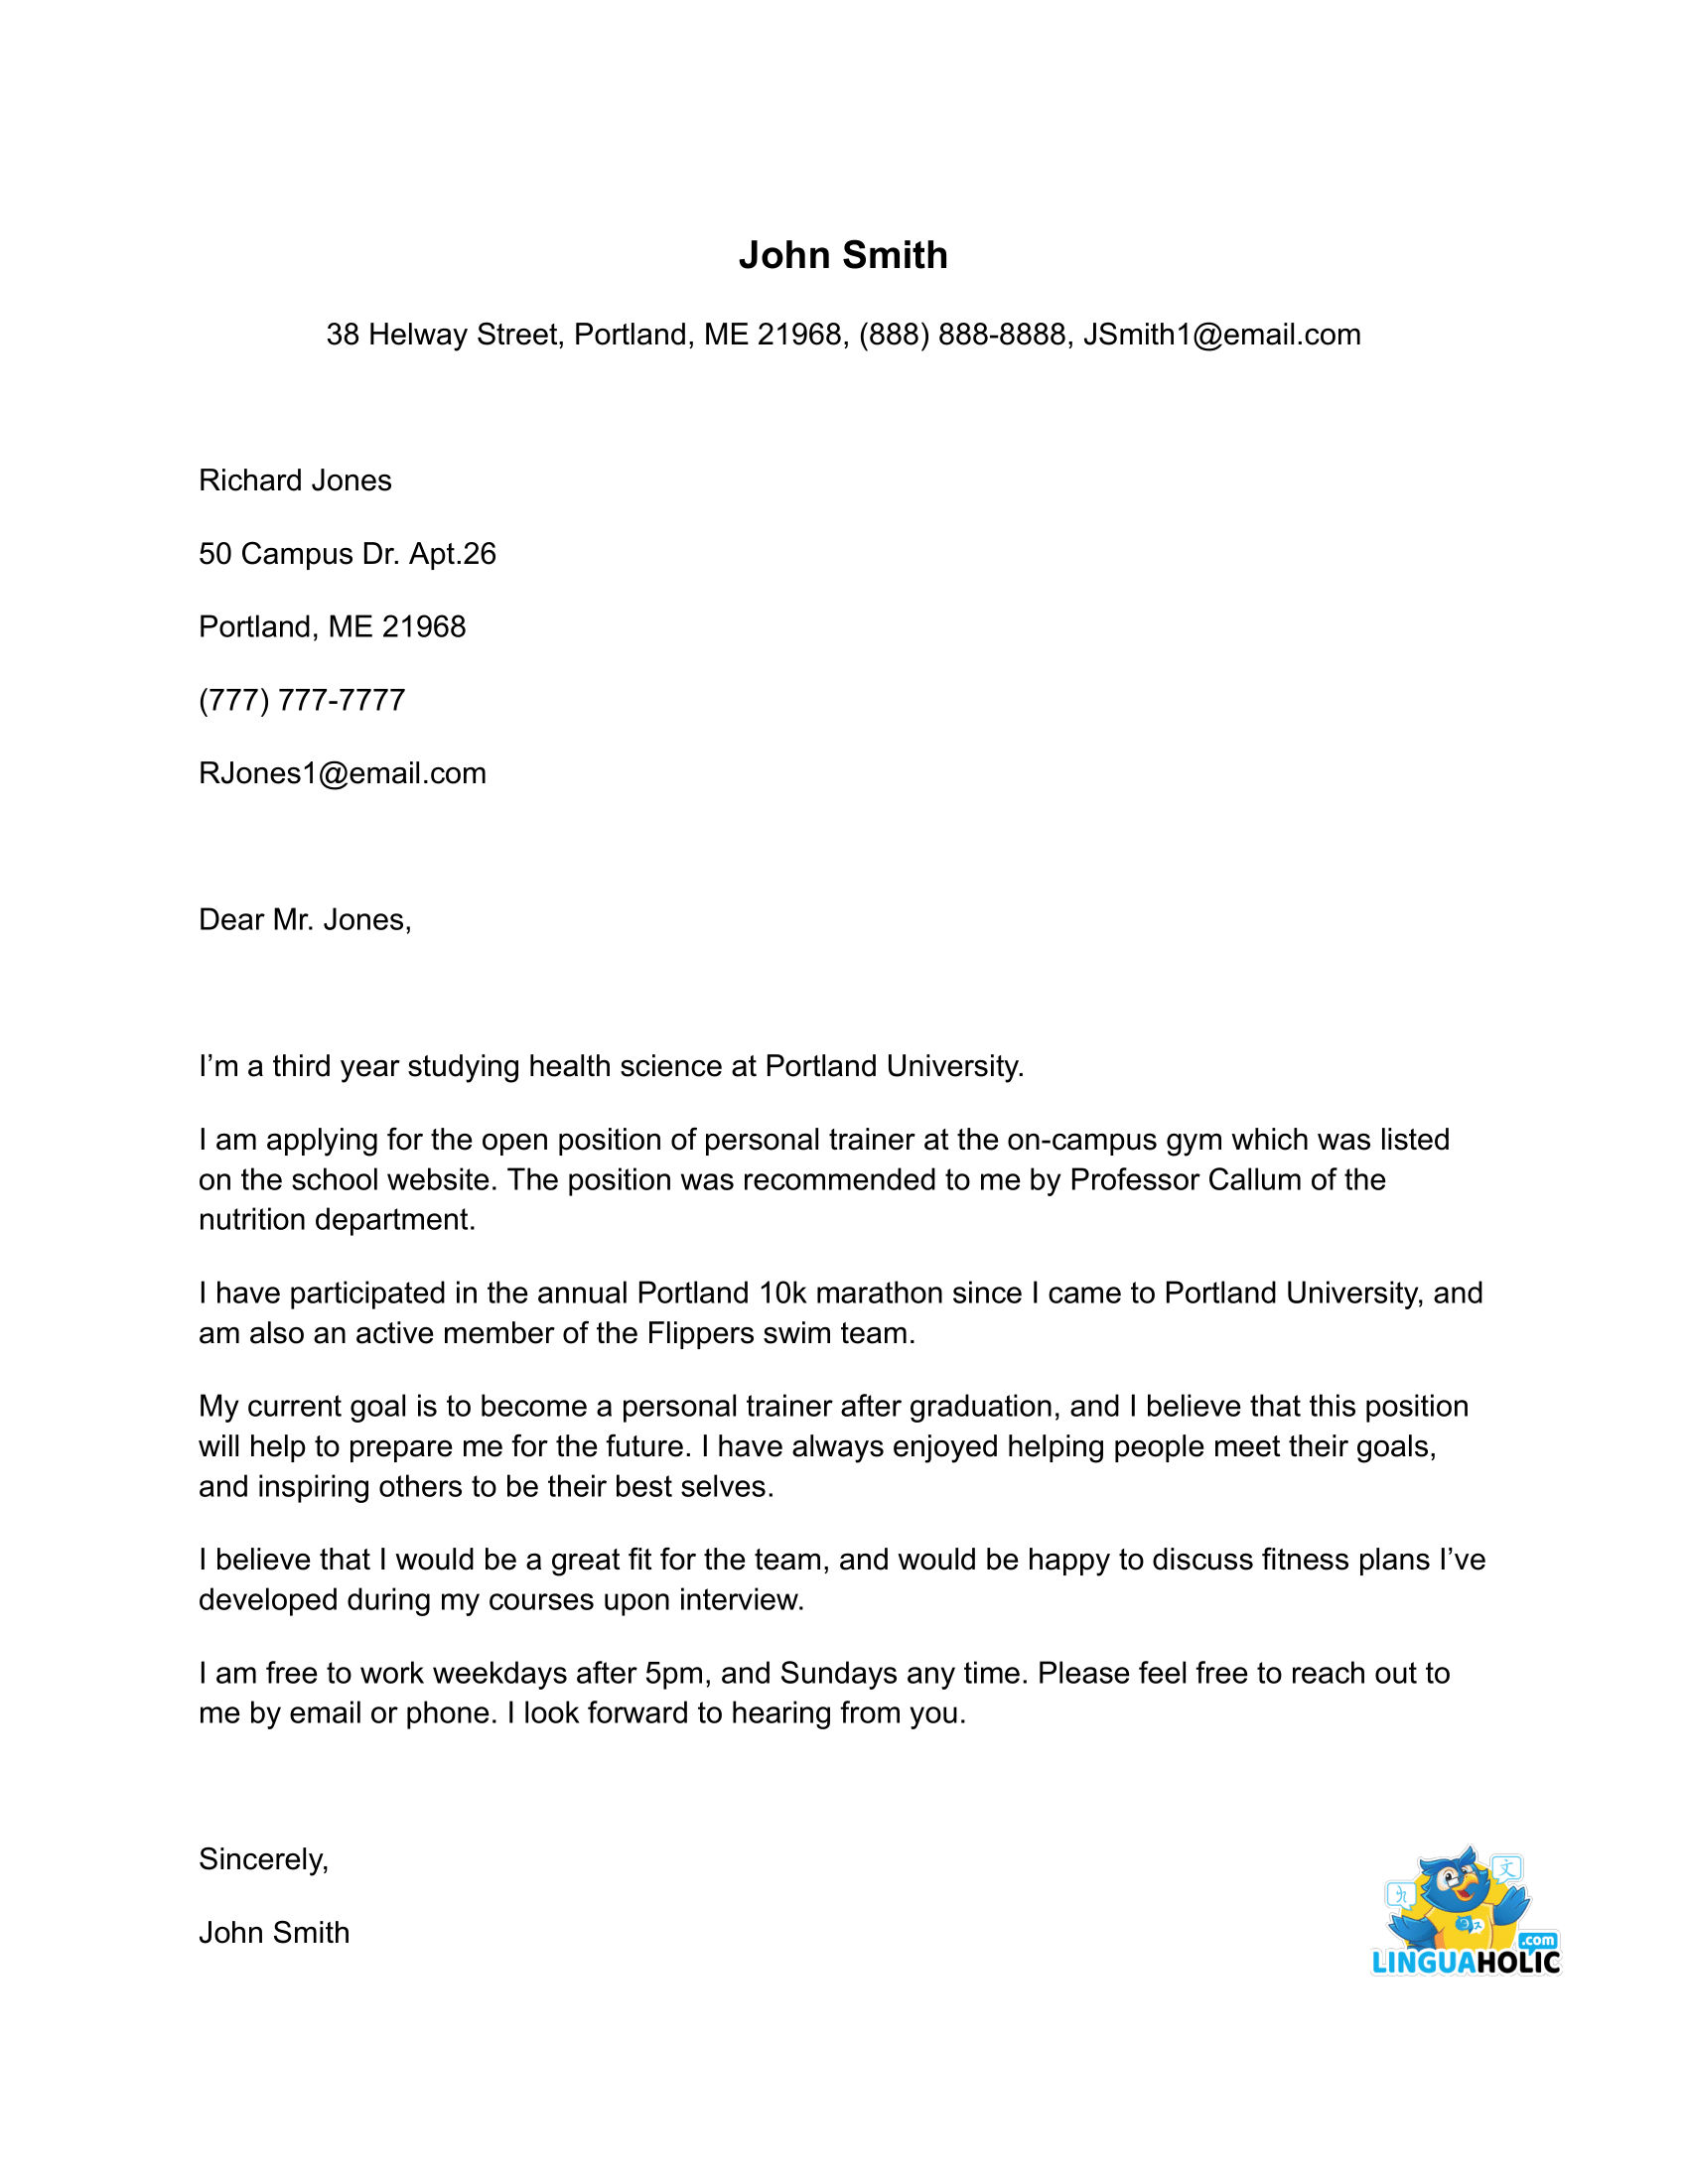 university work experience cover letter